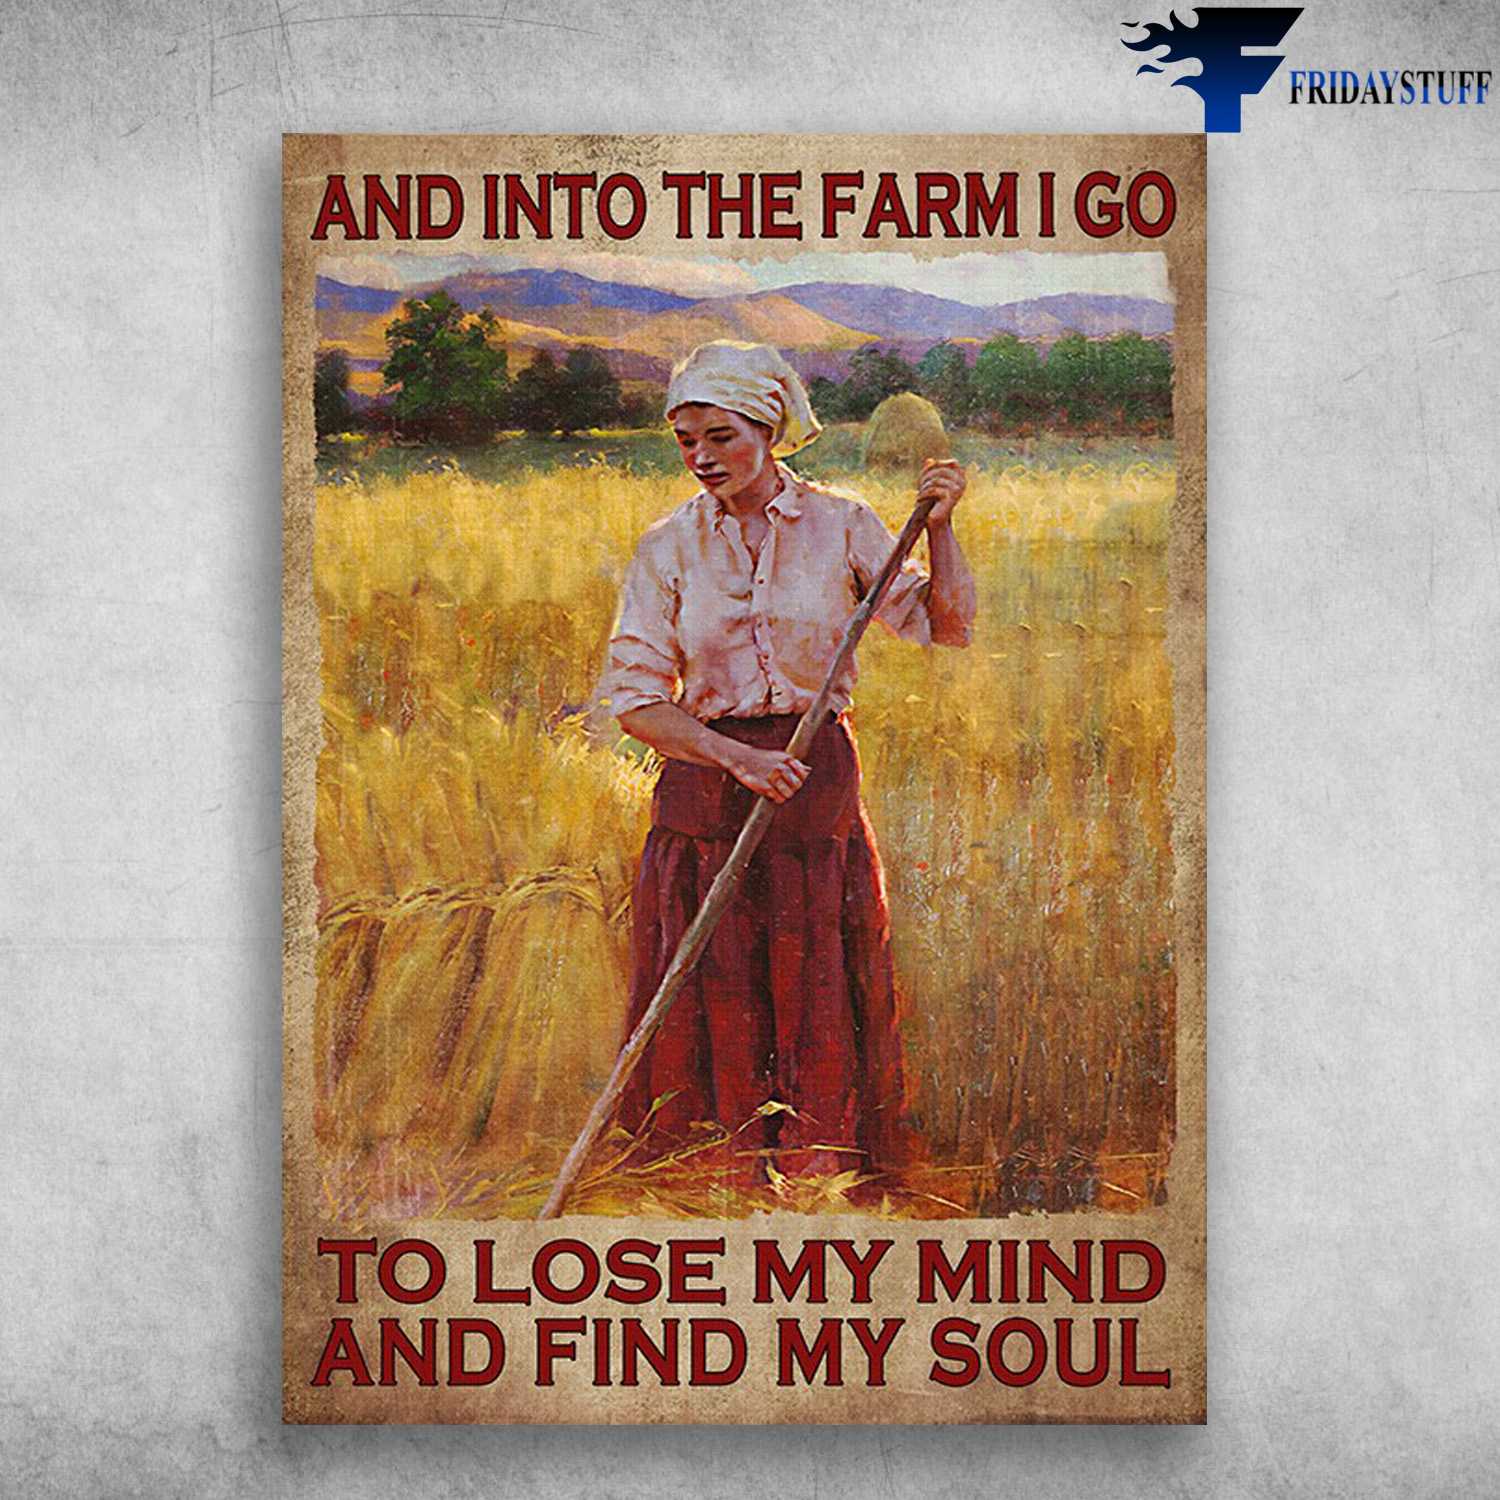 Farmer Poster, Girl On Farm - And Into The Farm, I Go To Lose My Mind And Find My Soul